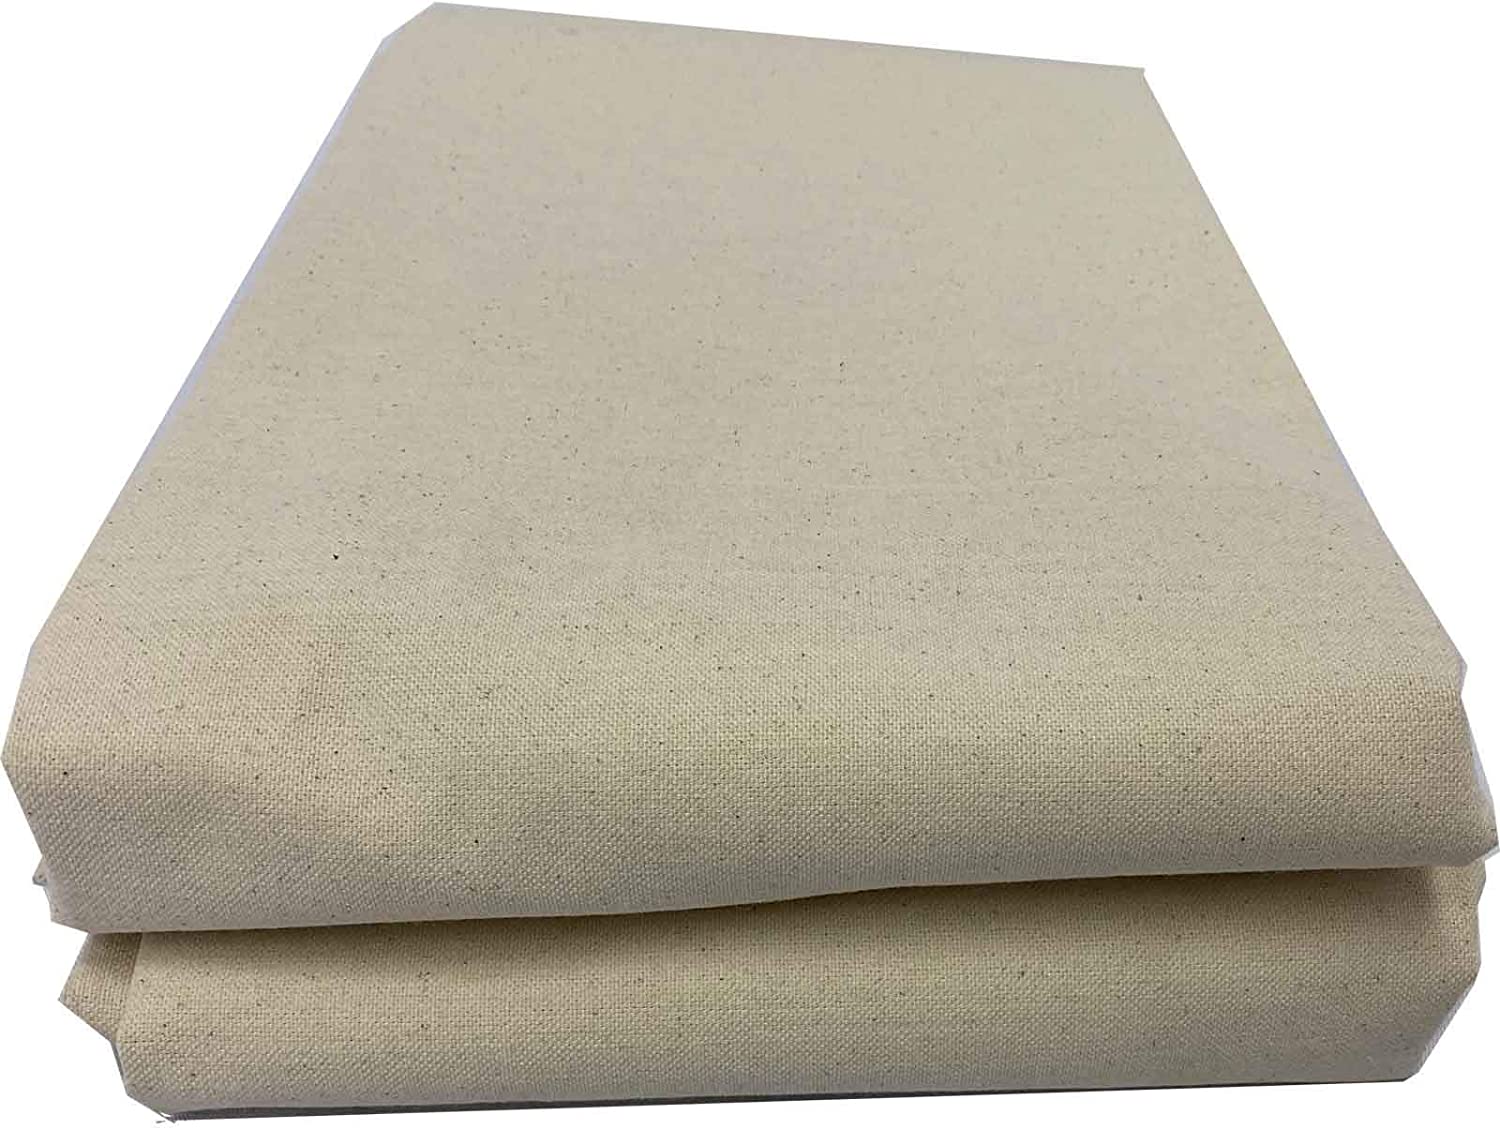 10-Ounces Natural Canvas Fabric By The Yard, 60-Inch Wide.